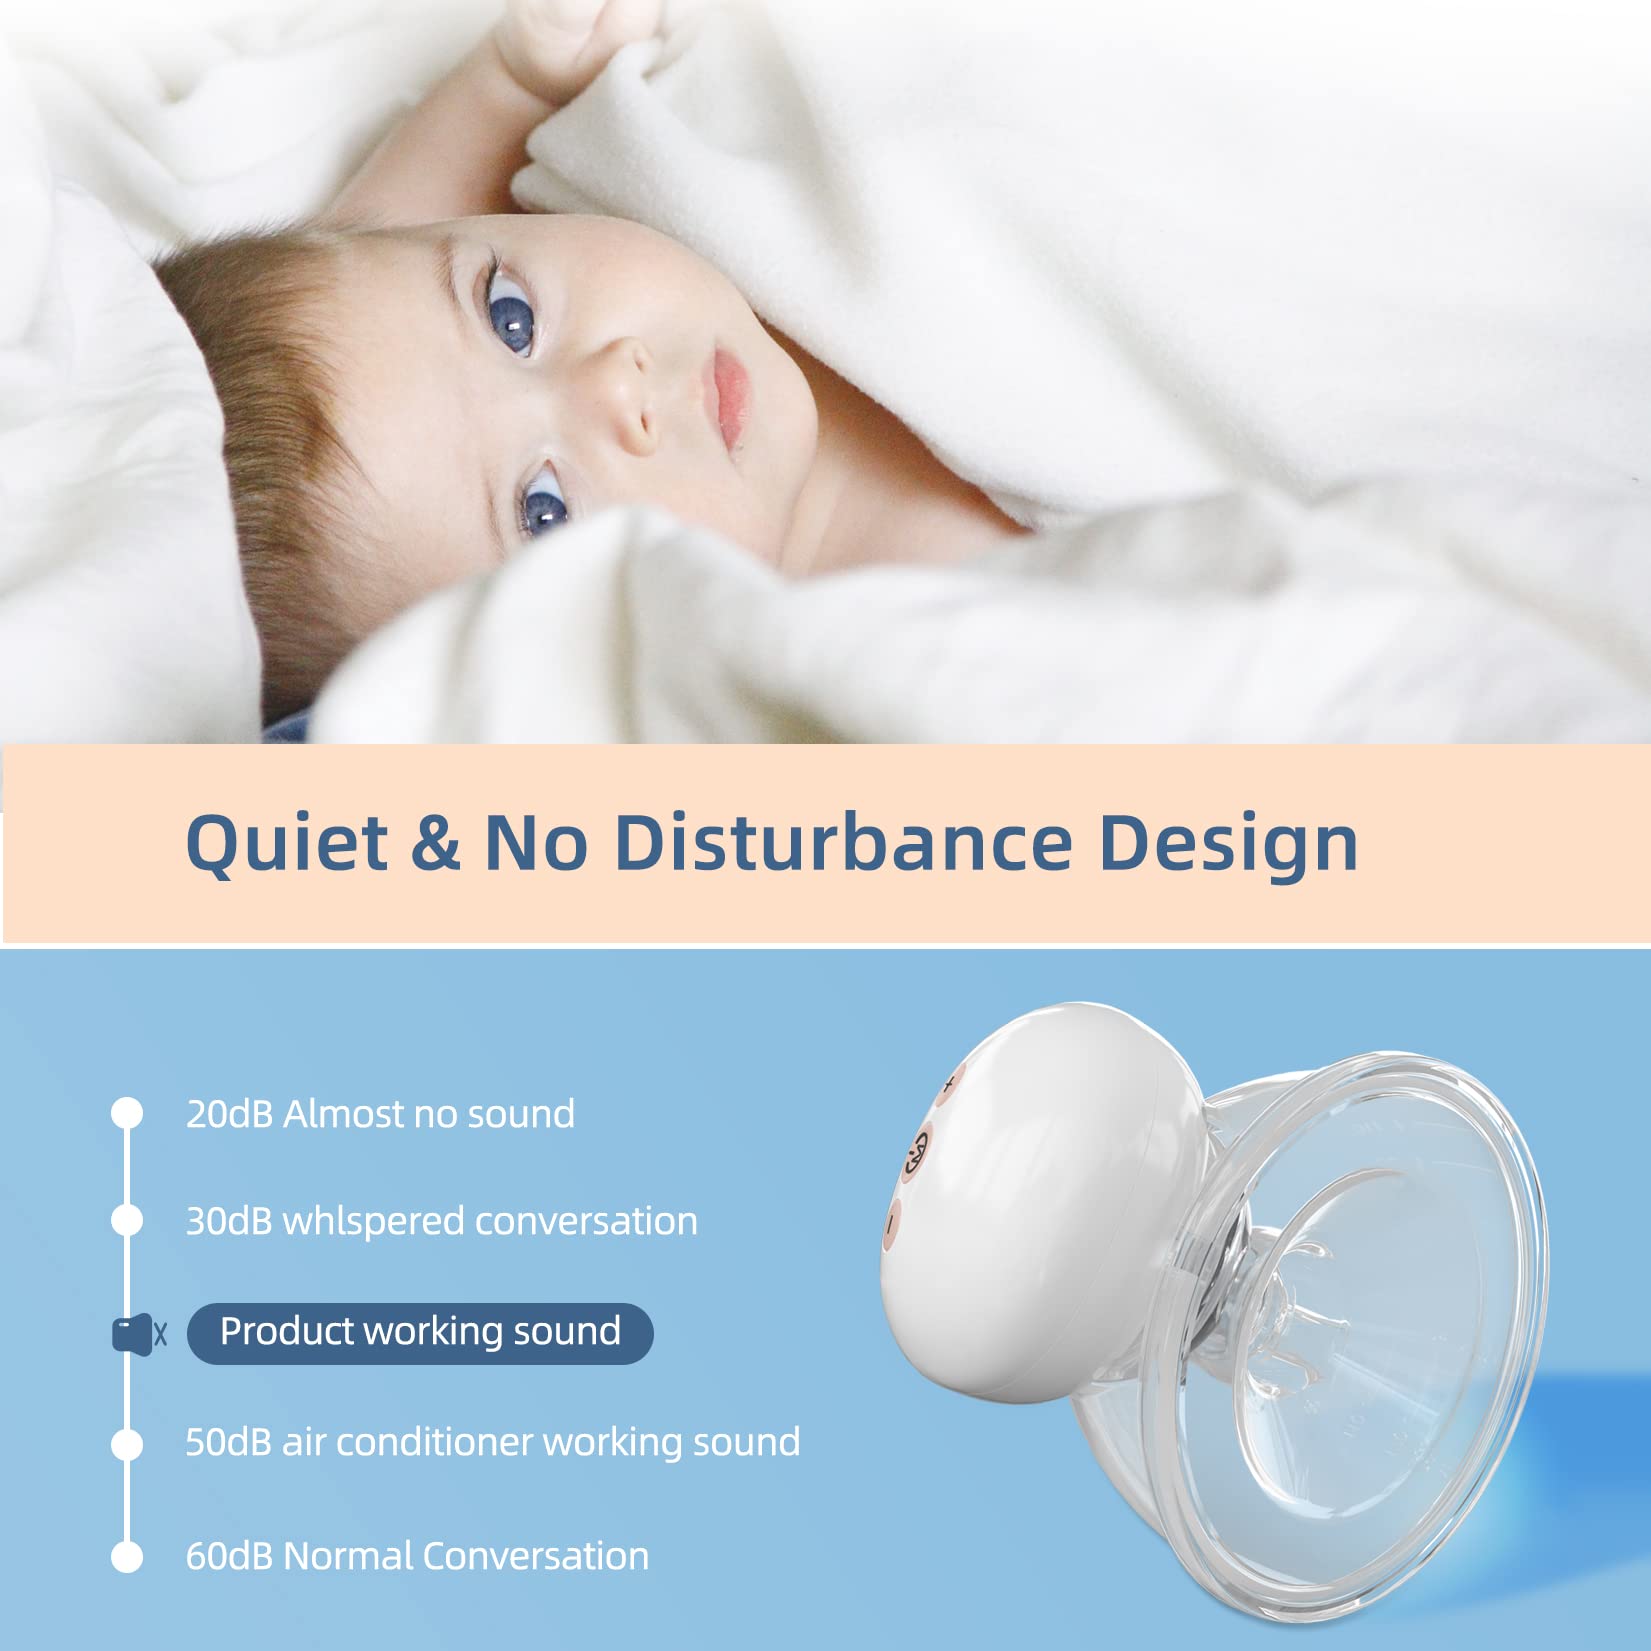 Breast Pump Hands Free Smart Silent Portable Double Electric Wearable, 3 Modes & 10 Levels Adjustment, 24MM Flange, Leak-Proof Painless Breastfeeding Breastpump Can Be Worn in-Bra, White